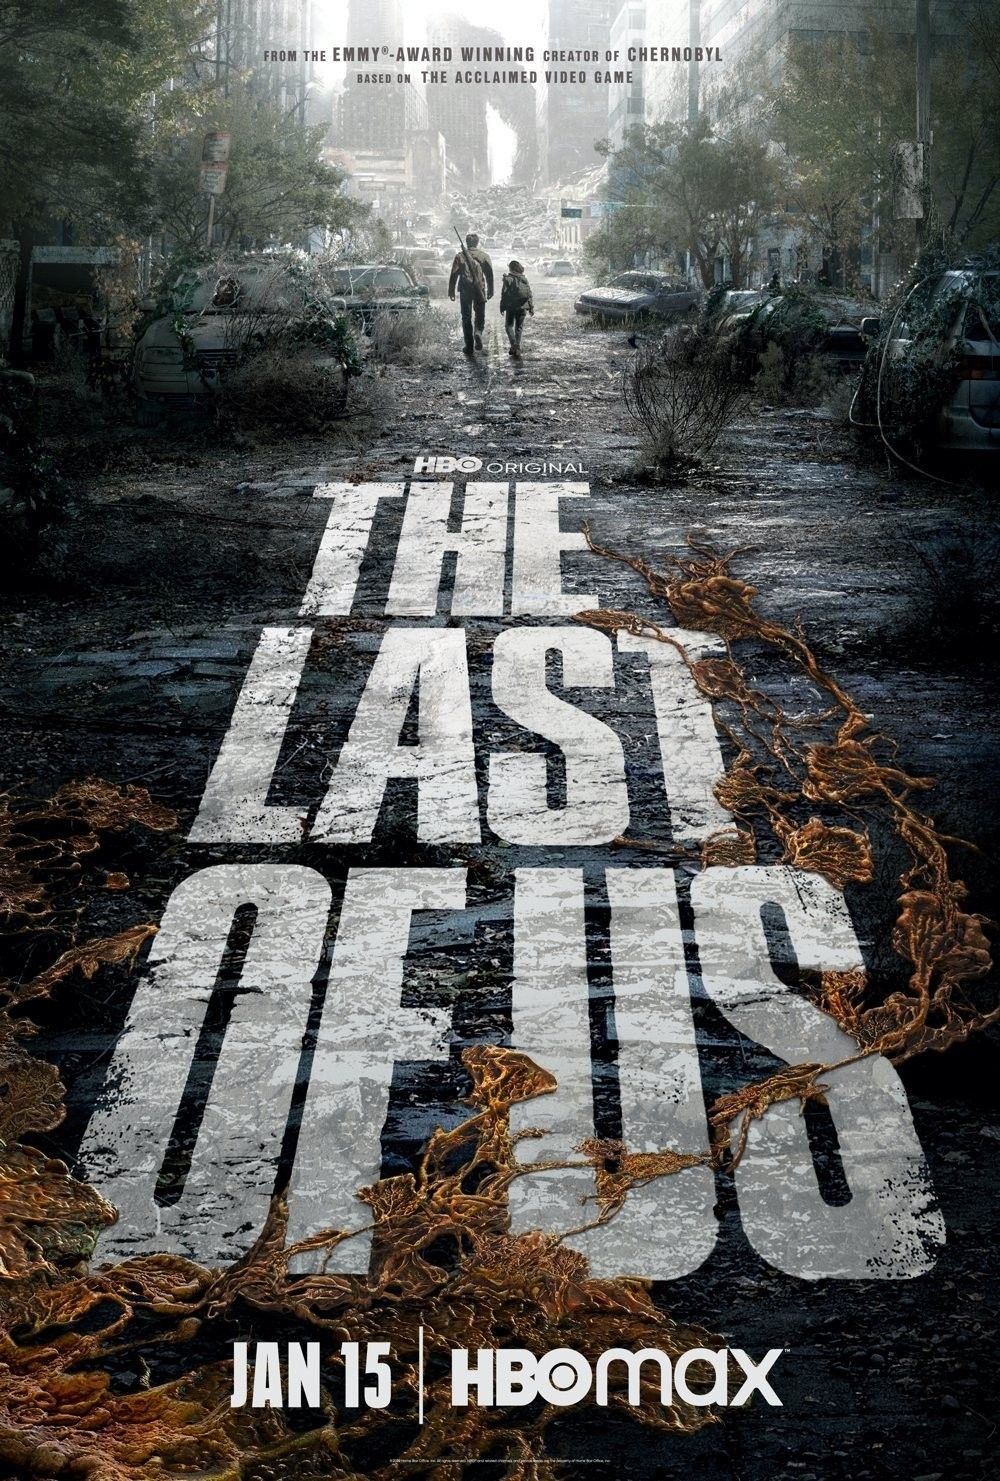 the-last-of-us-poster.jpg